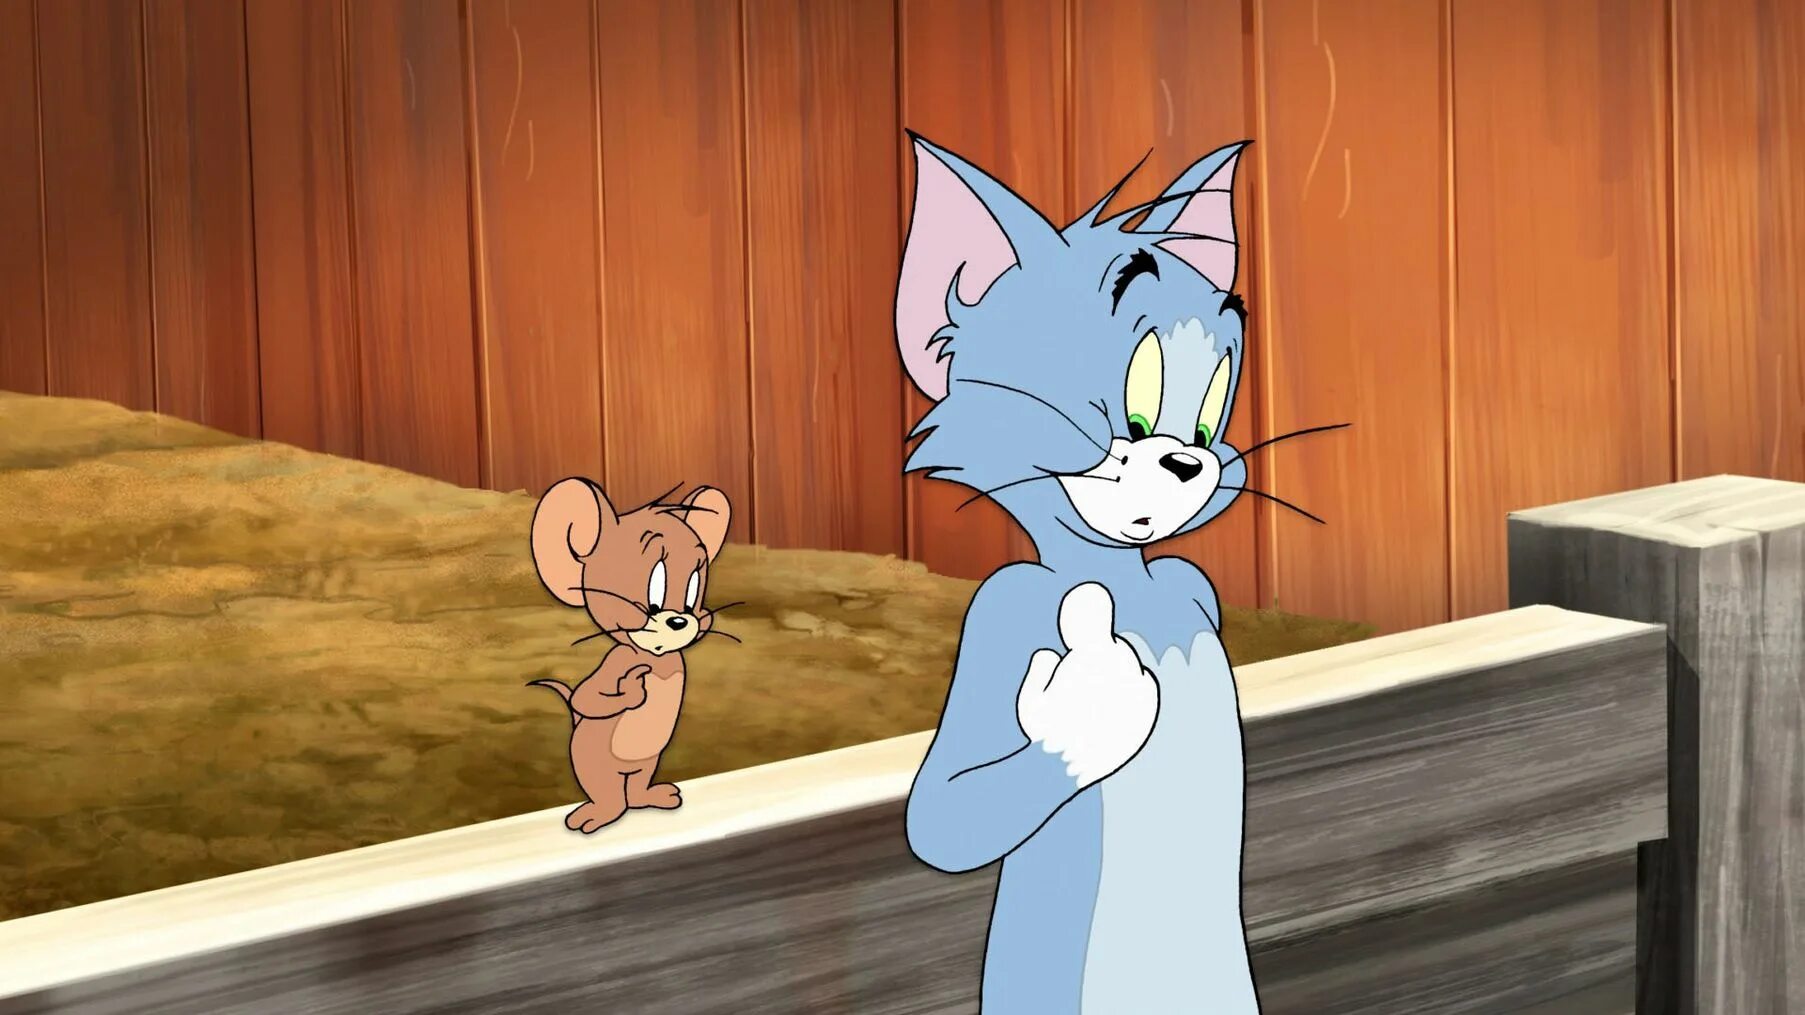 Tom and jerry 55. Tom and Jerry. Том и Джерри 1960. Том и Джерри Tom and Jerry.